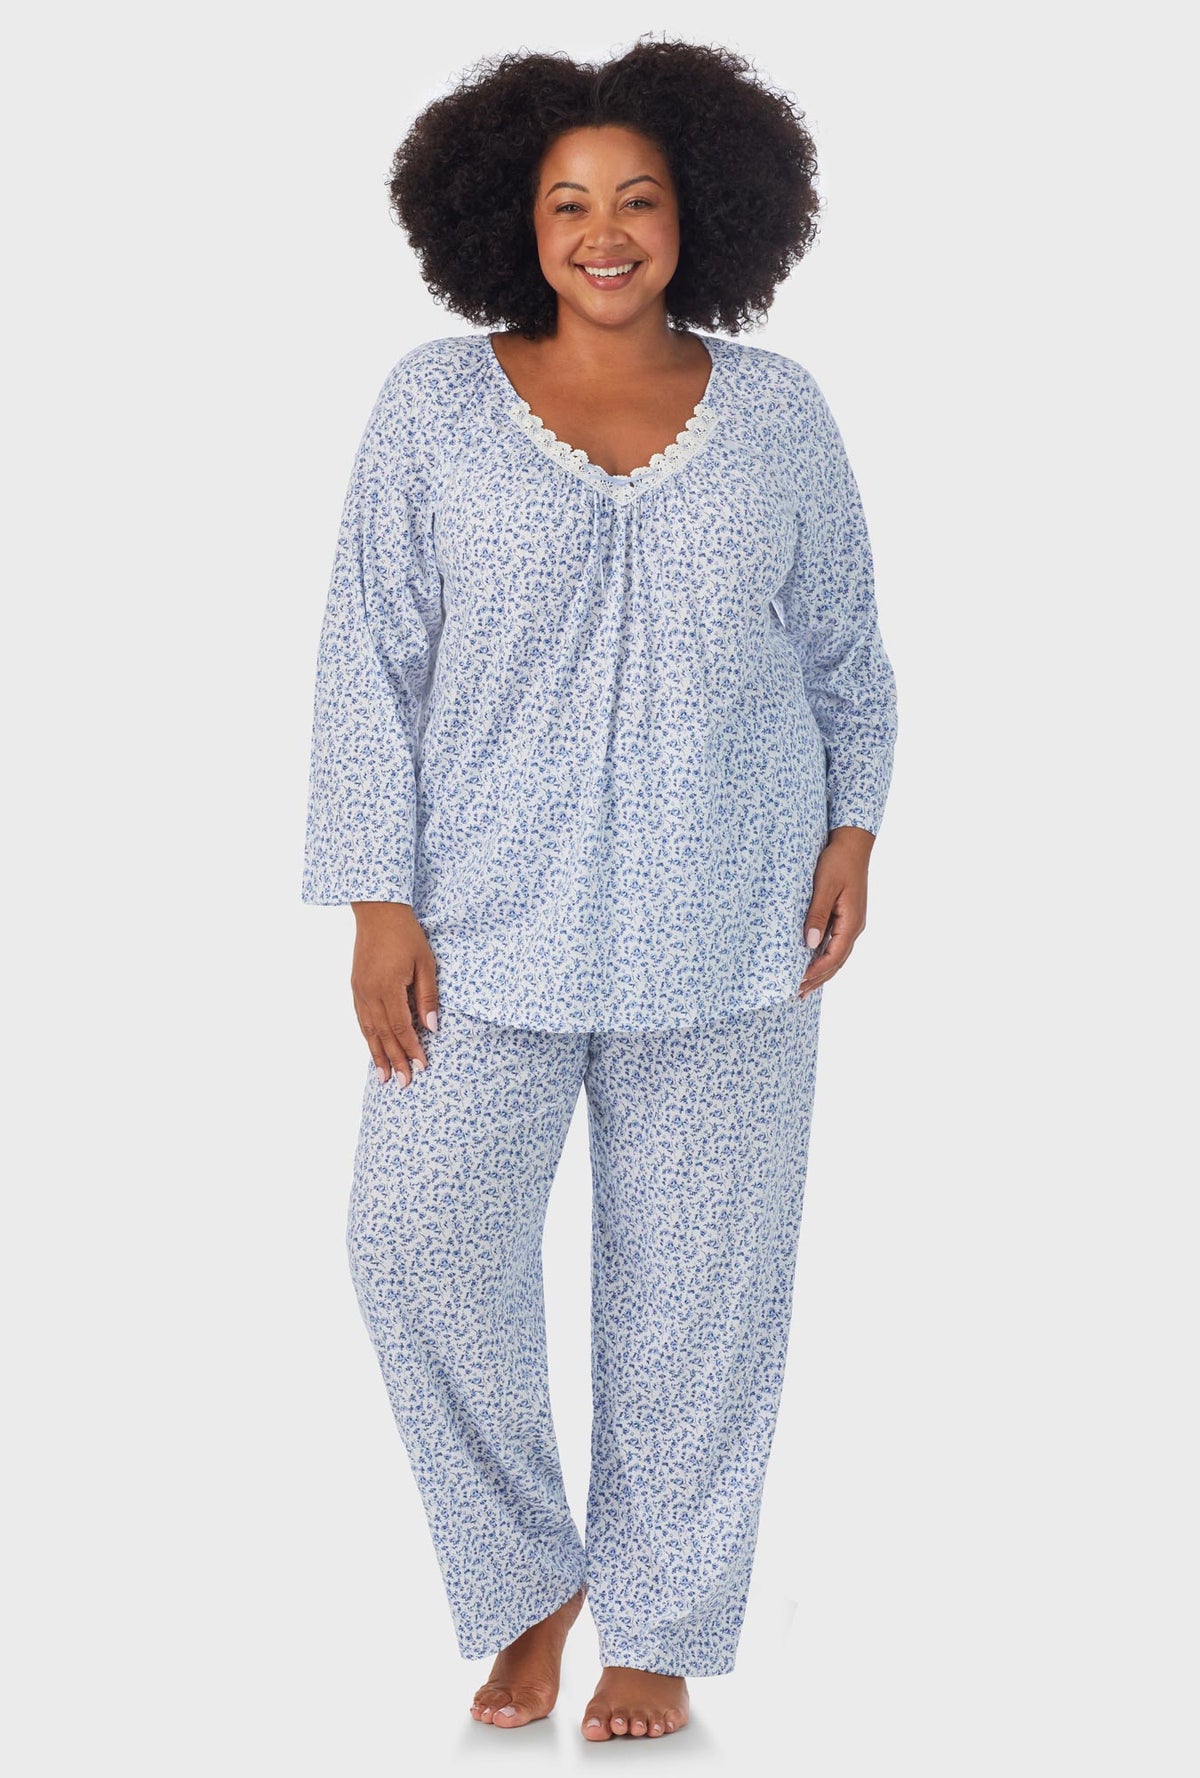 A lady wearing white Long Sleeve 3/4 Sleeve Long Pant plus size PJ Set with Dusty Blue print